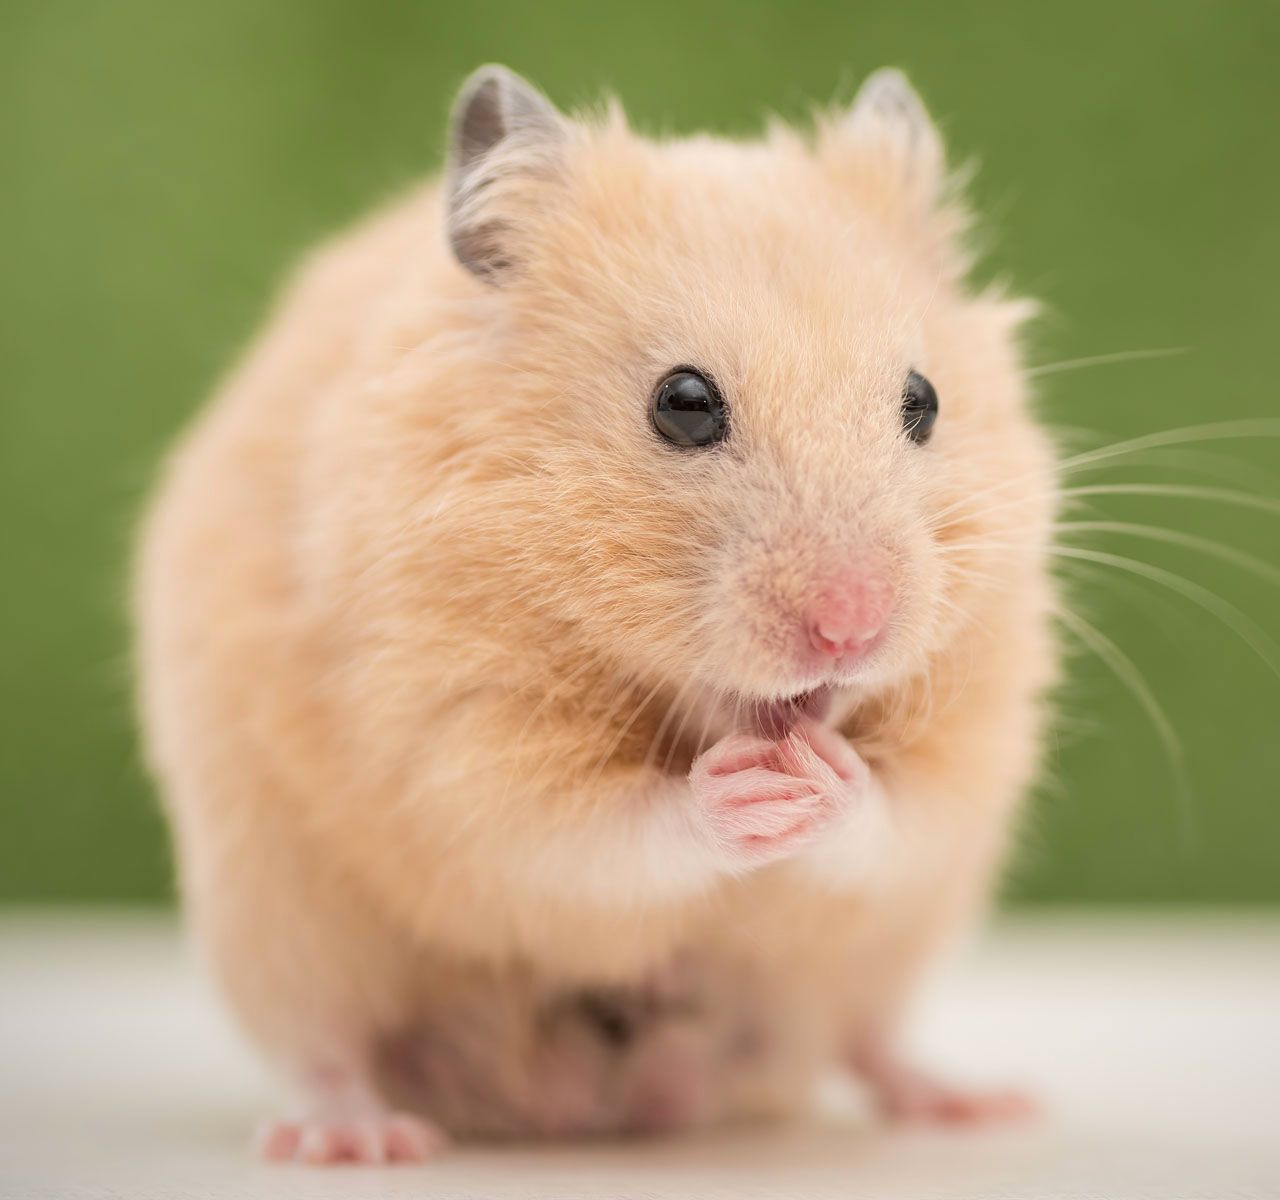 different types of hamsters for pets